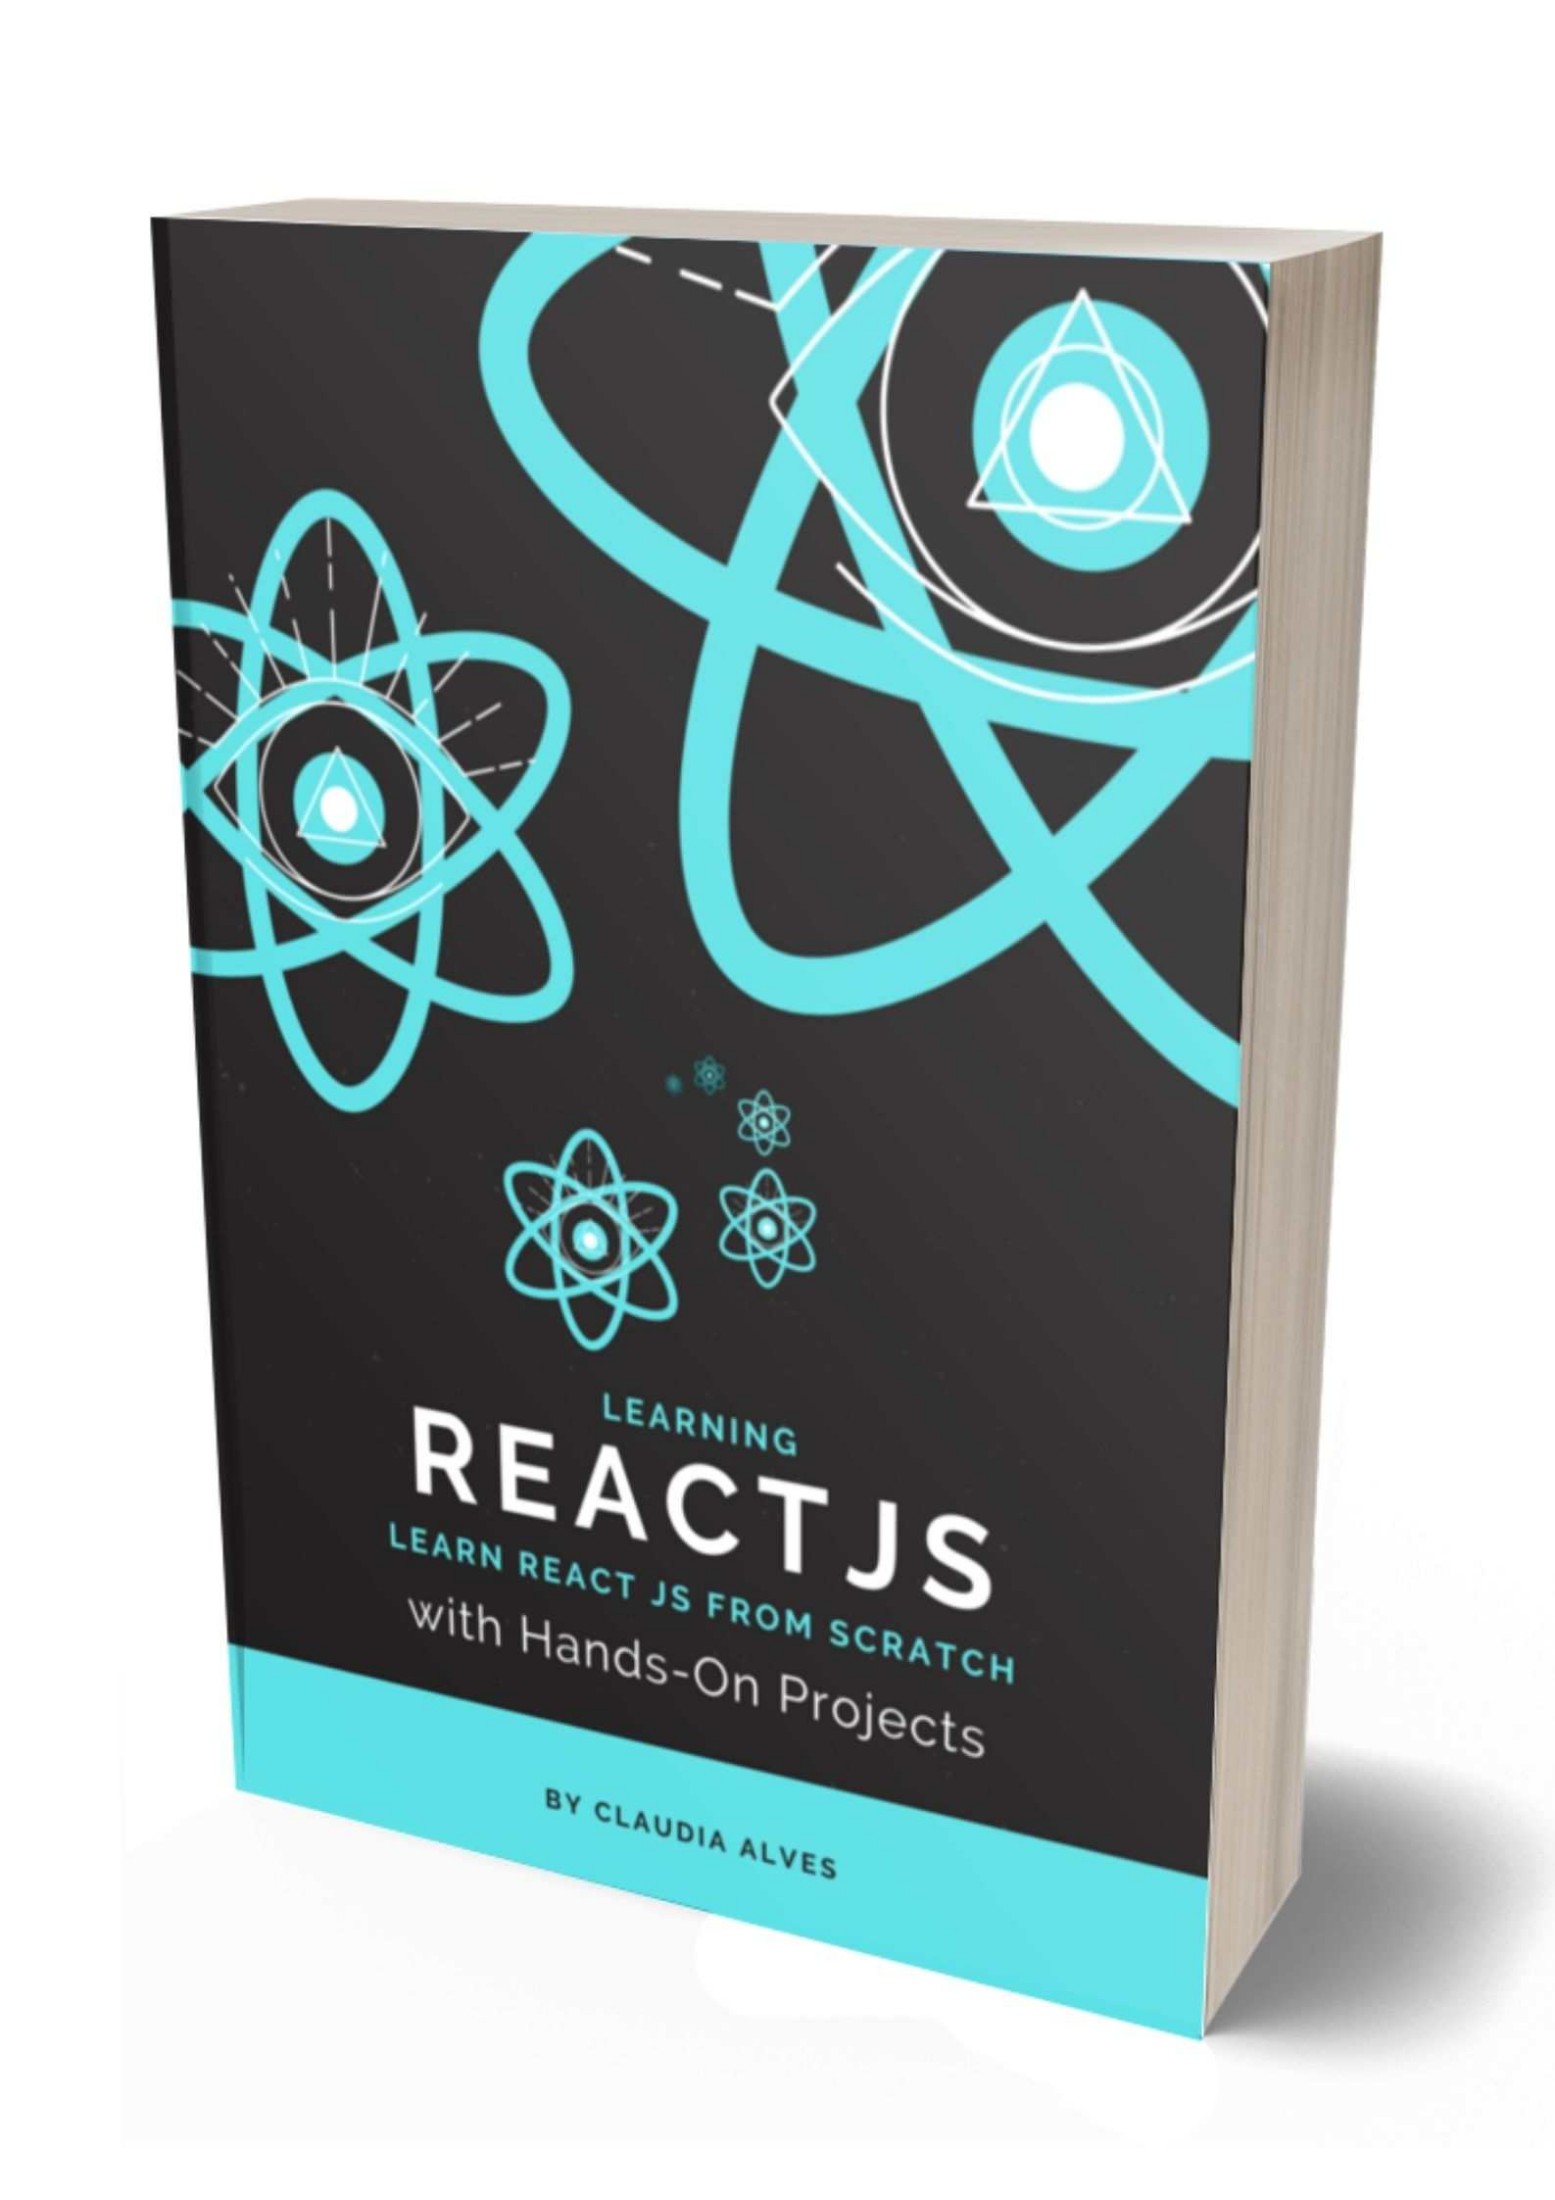 Learning React Js: Learn React JS From Scratch with Hands-On Projects, 2nd Edition